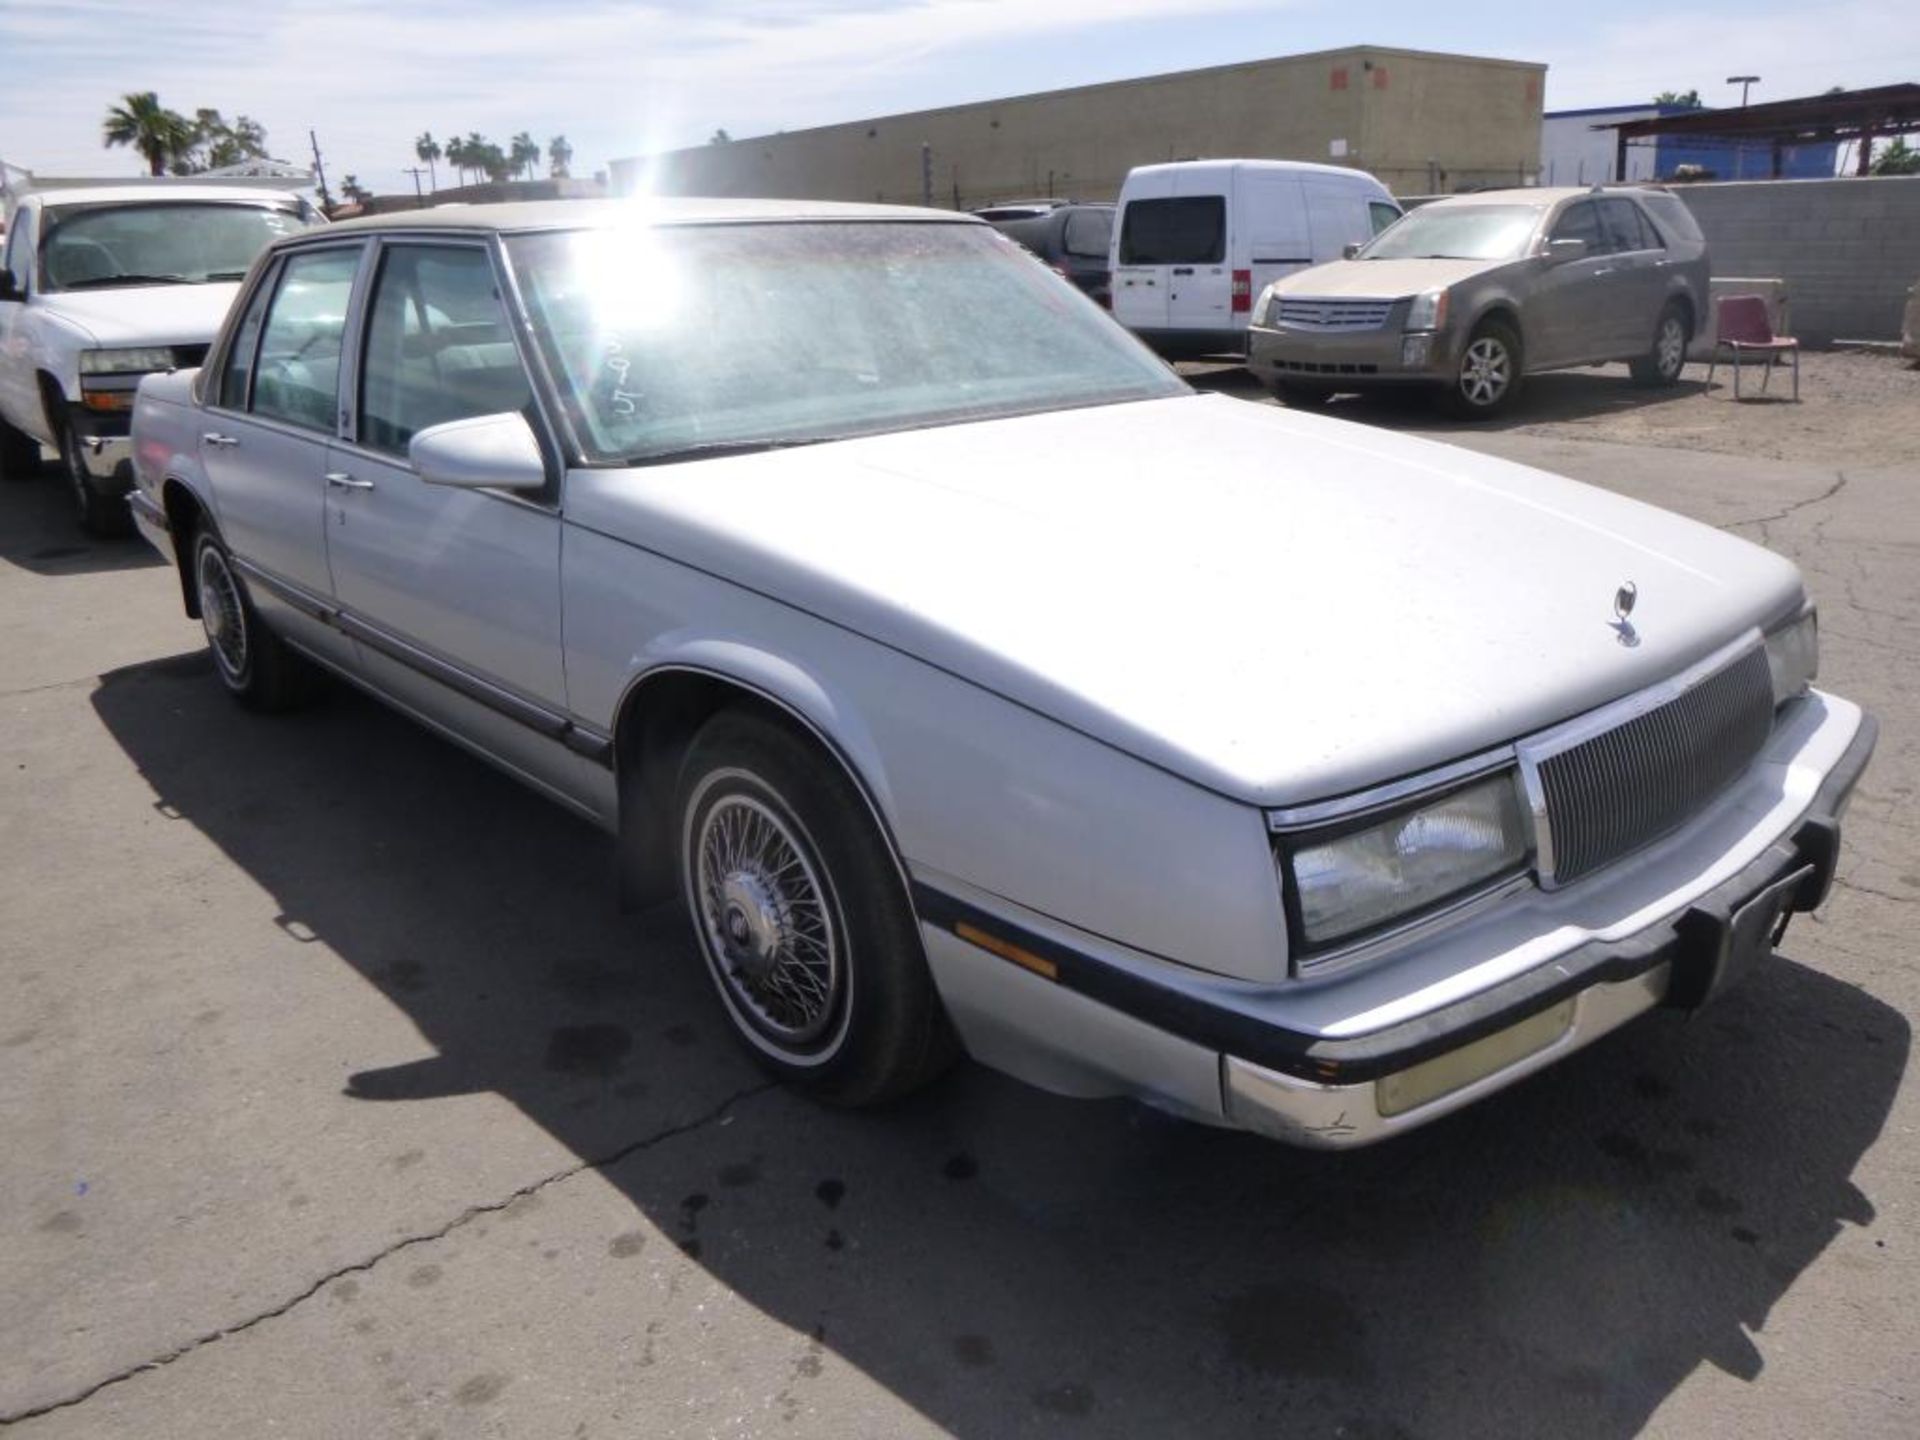 1990 Buick LeSabre - Image 4 of 15